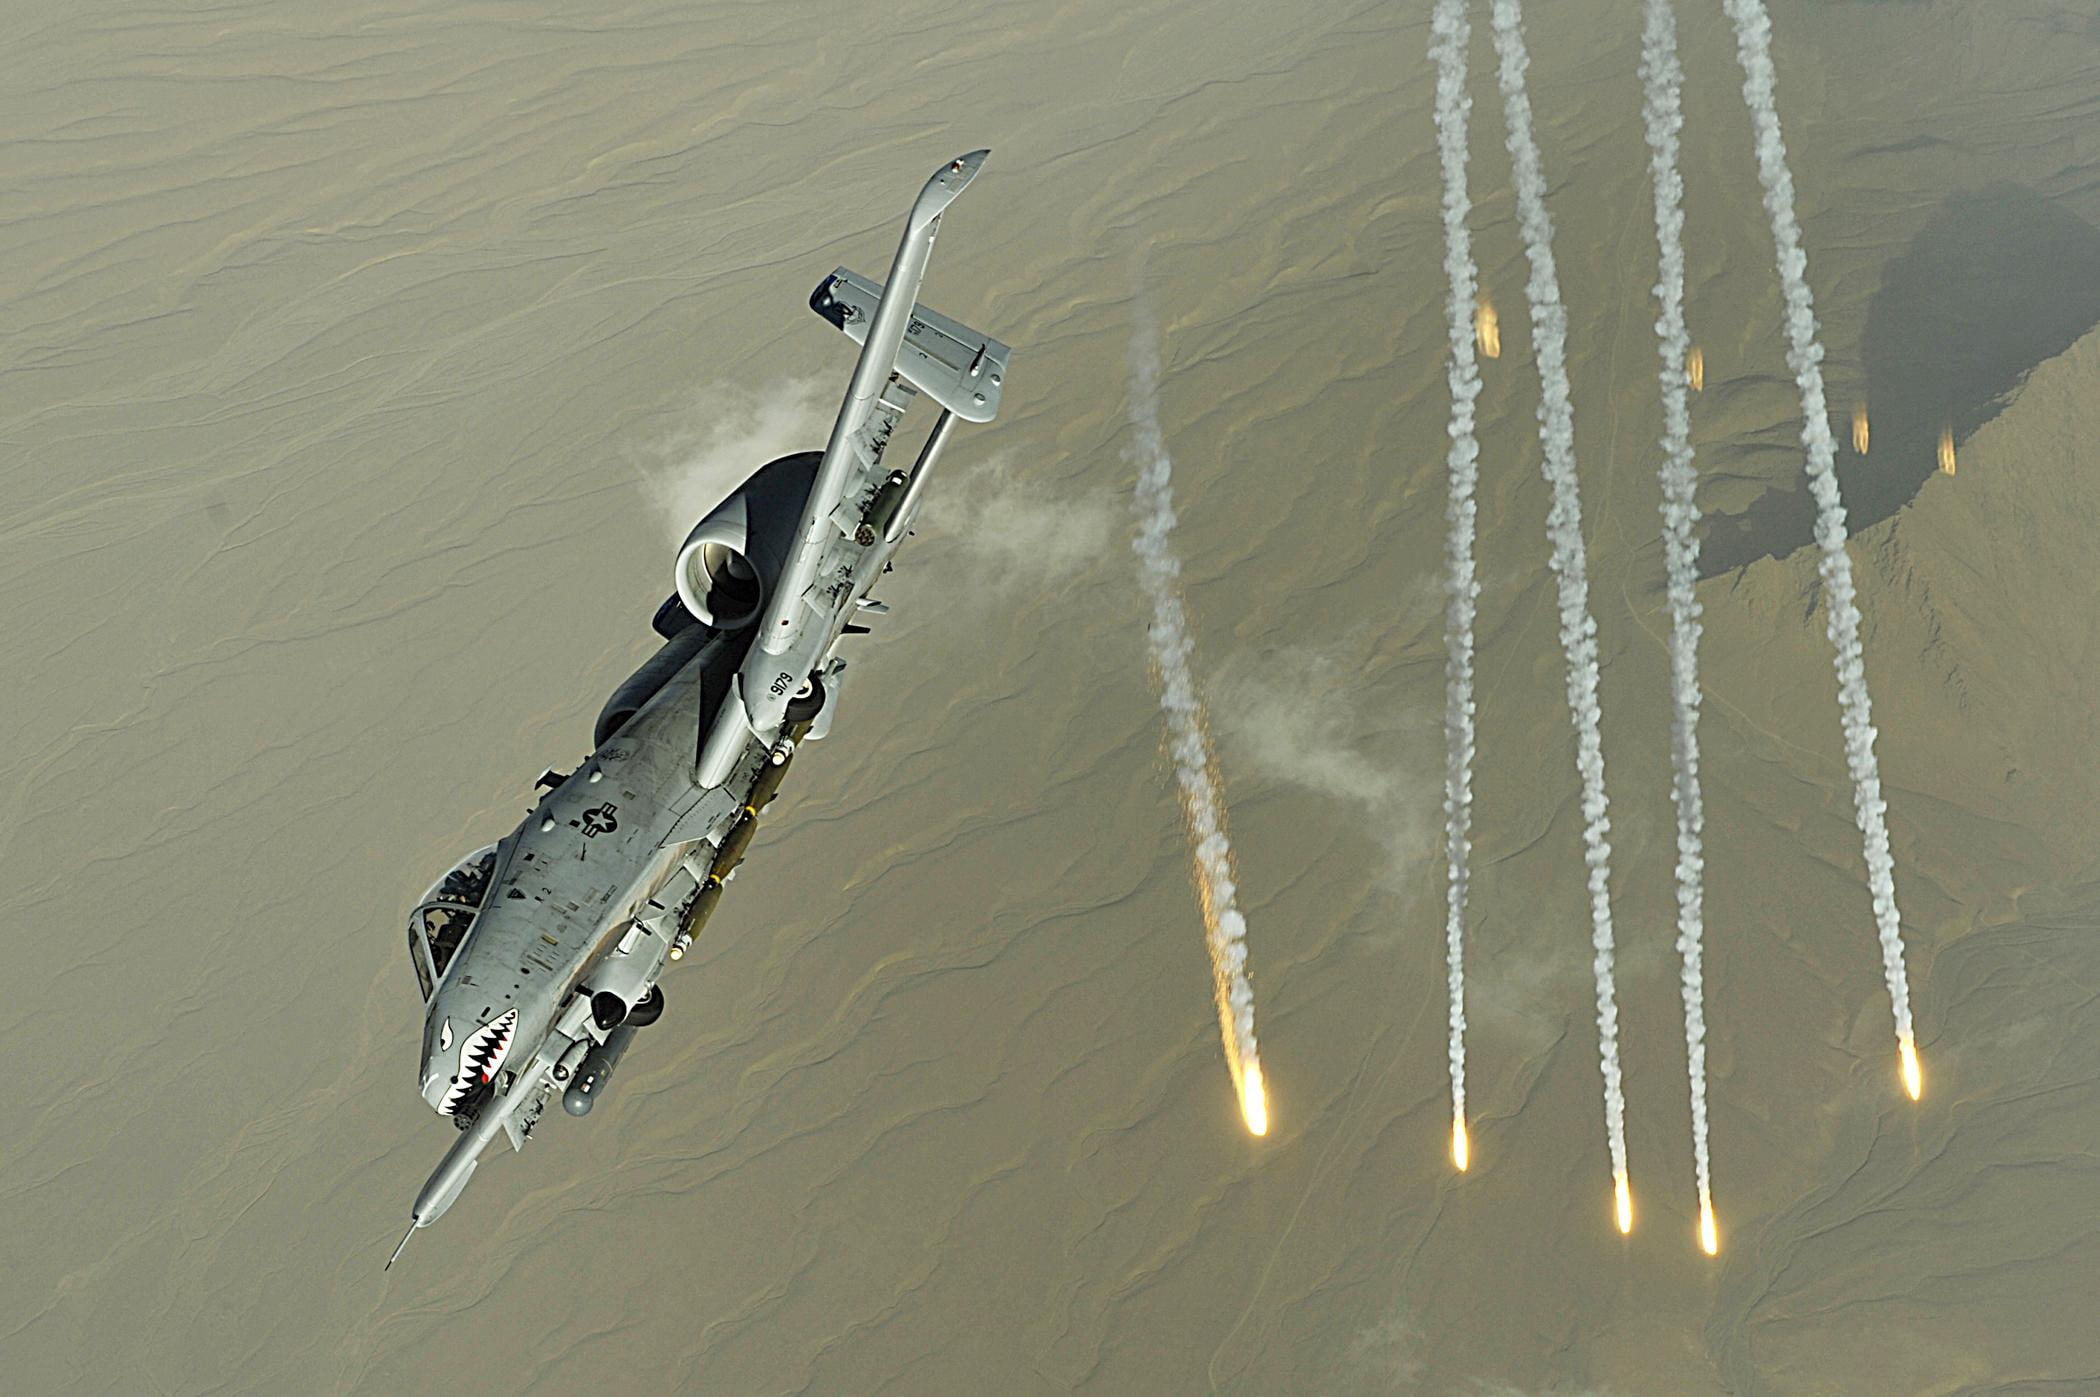 A10 In Action, thunderbolt, warthog, flares, wings, aircraft planes